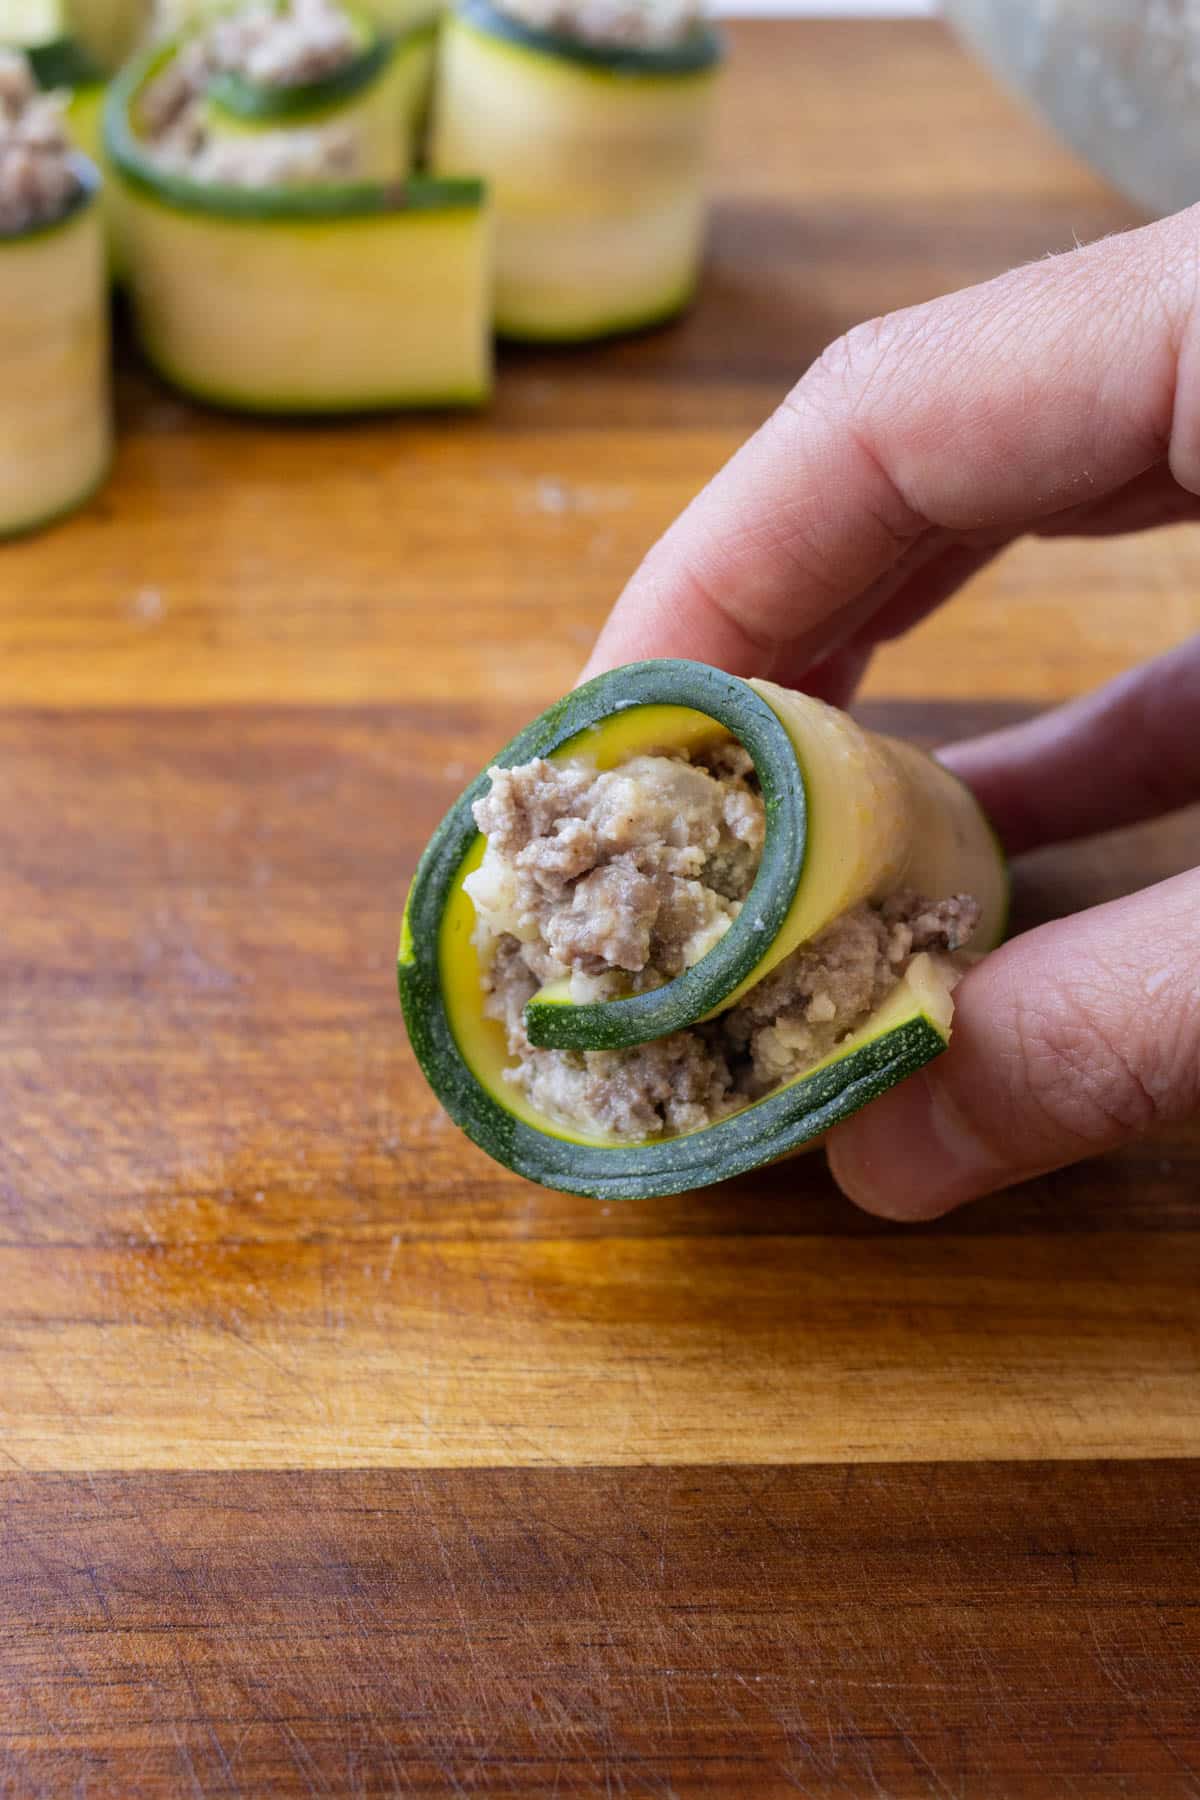 Meat filling is added to the zucchini stripped and rolled up.